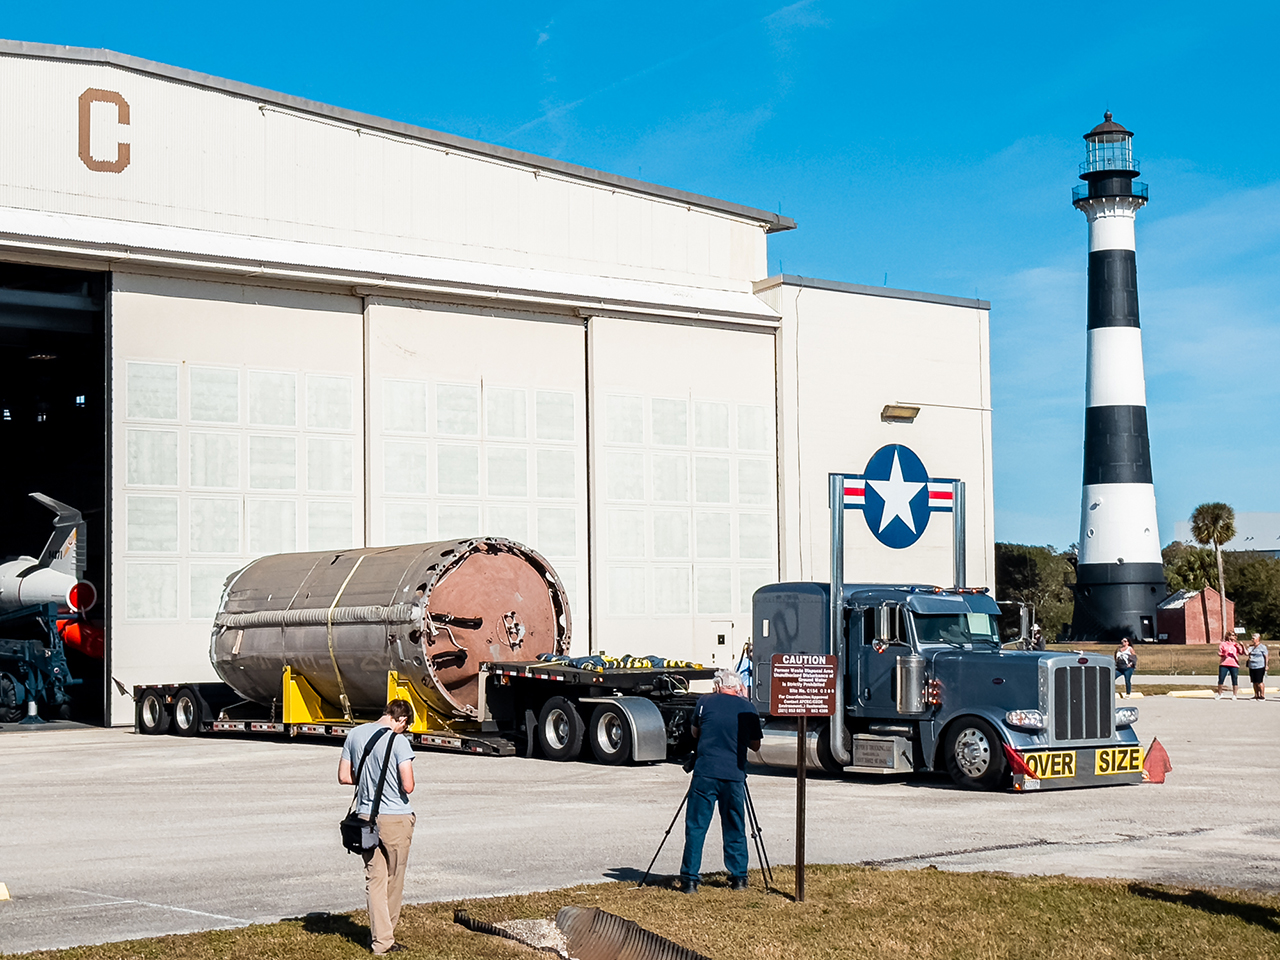 A segment of the Titan II first stage that launched NASA's Gemini 5 mission arrives at Hangar C to go on display as part of the Cape Canaveral Space Force Museum's collection in Florida on Thursday, Jan. 19, 2023.